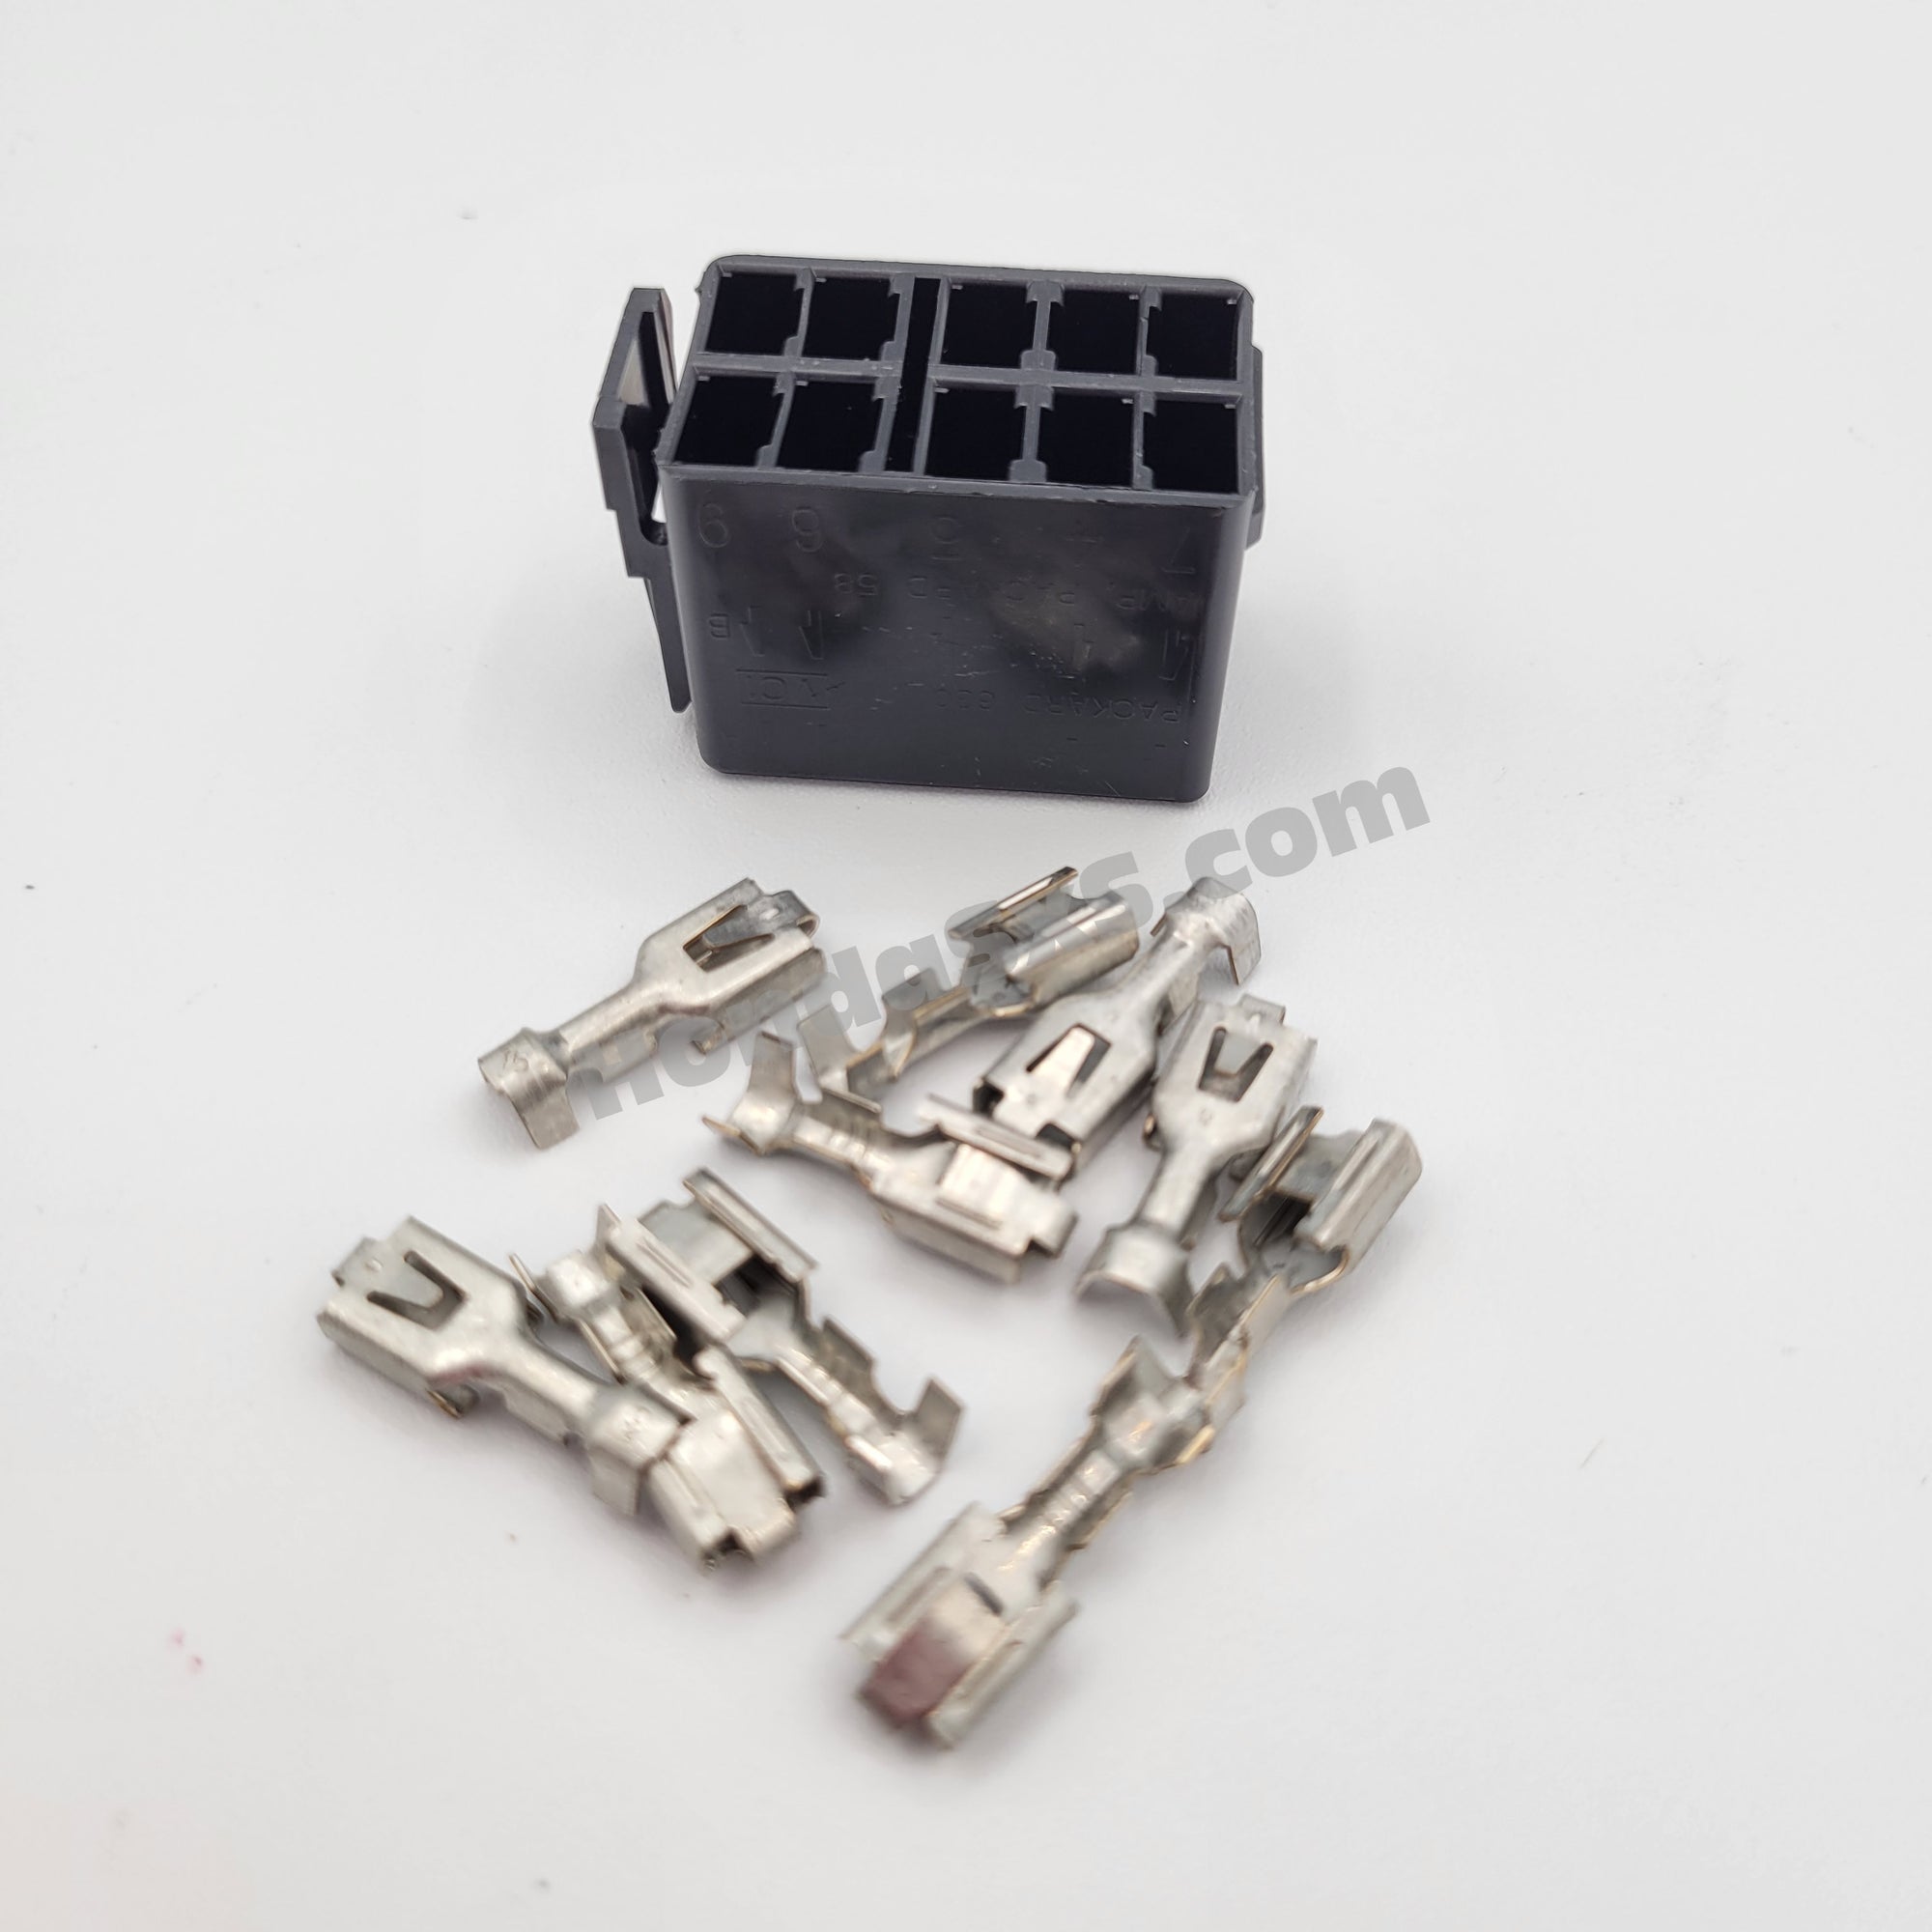 Carling 8 pin Rocker Switch Rear Block Connector Housing and Pins